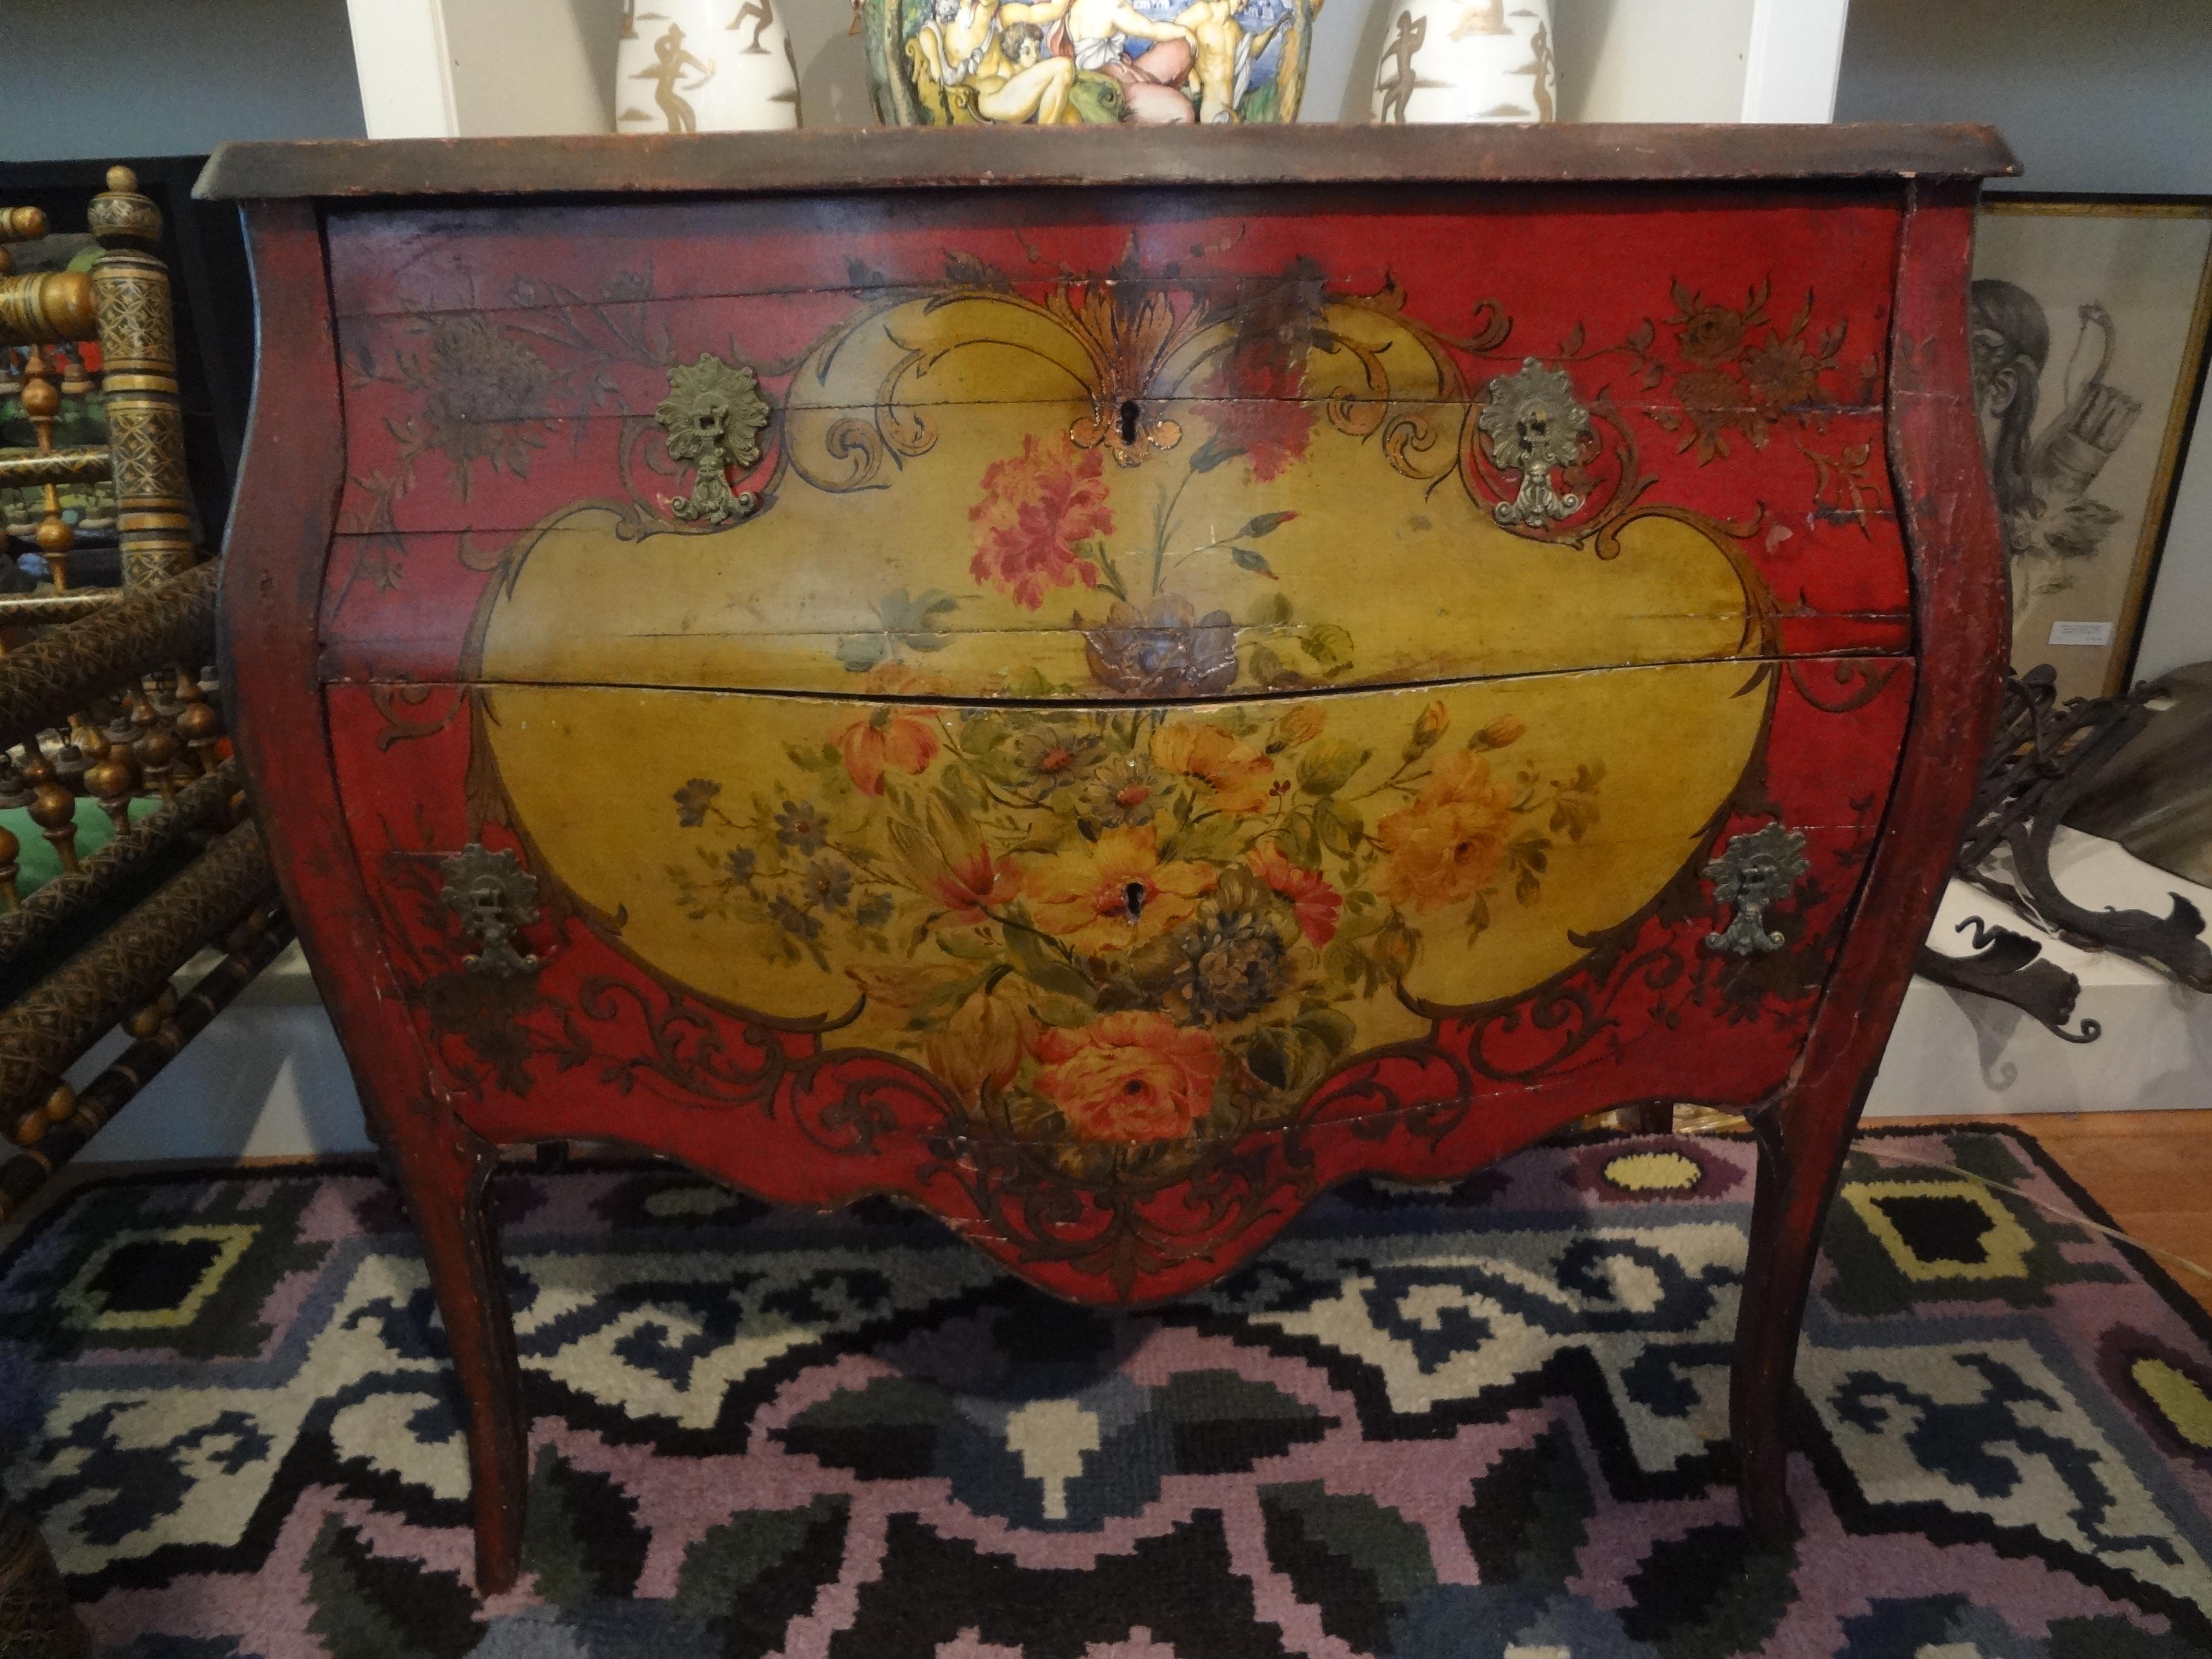 19th century Venetian painted chest or Commode.
Stunning late 19th-early 20th century Venetian Louis XV style painted two-drawer chest, credenza or commode. This Rococo chest with a lovely floral decorated front, sides and top has beautiful bronze